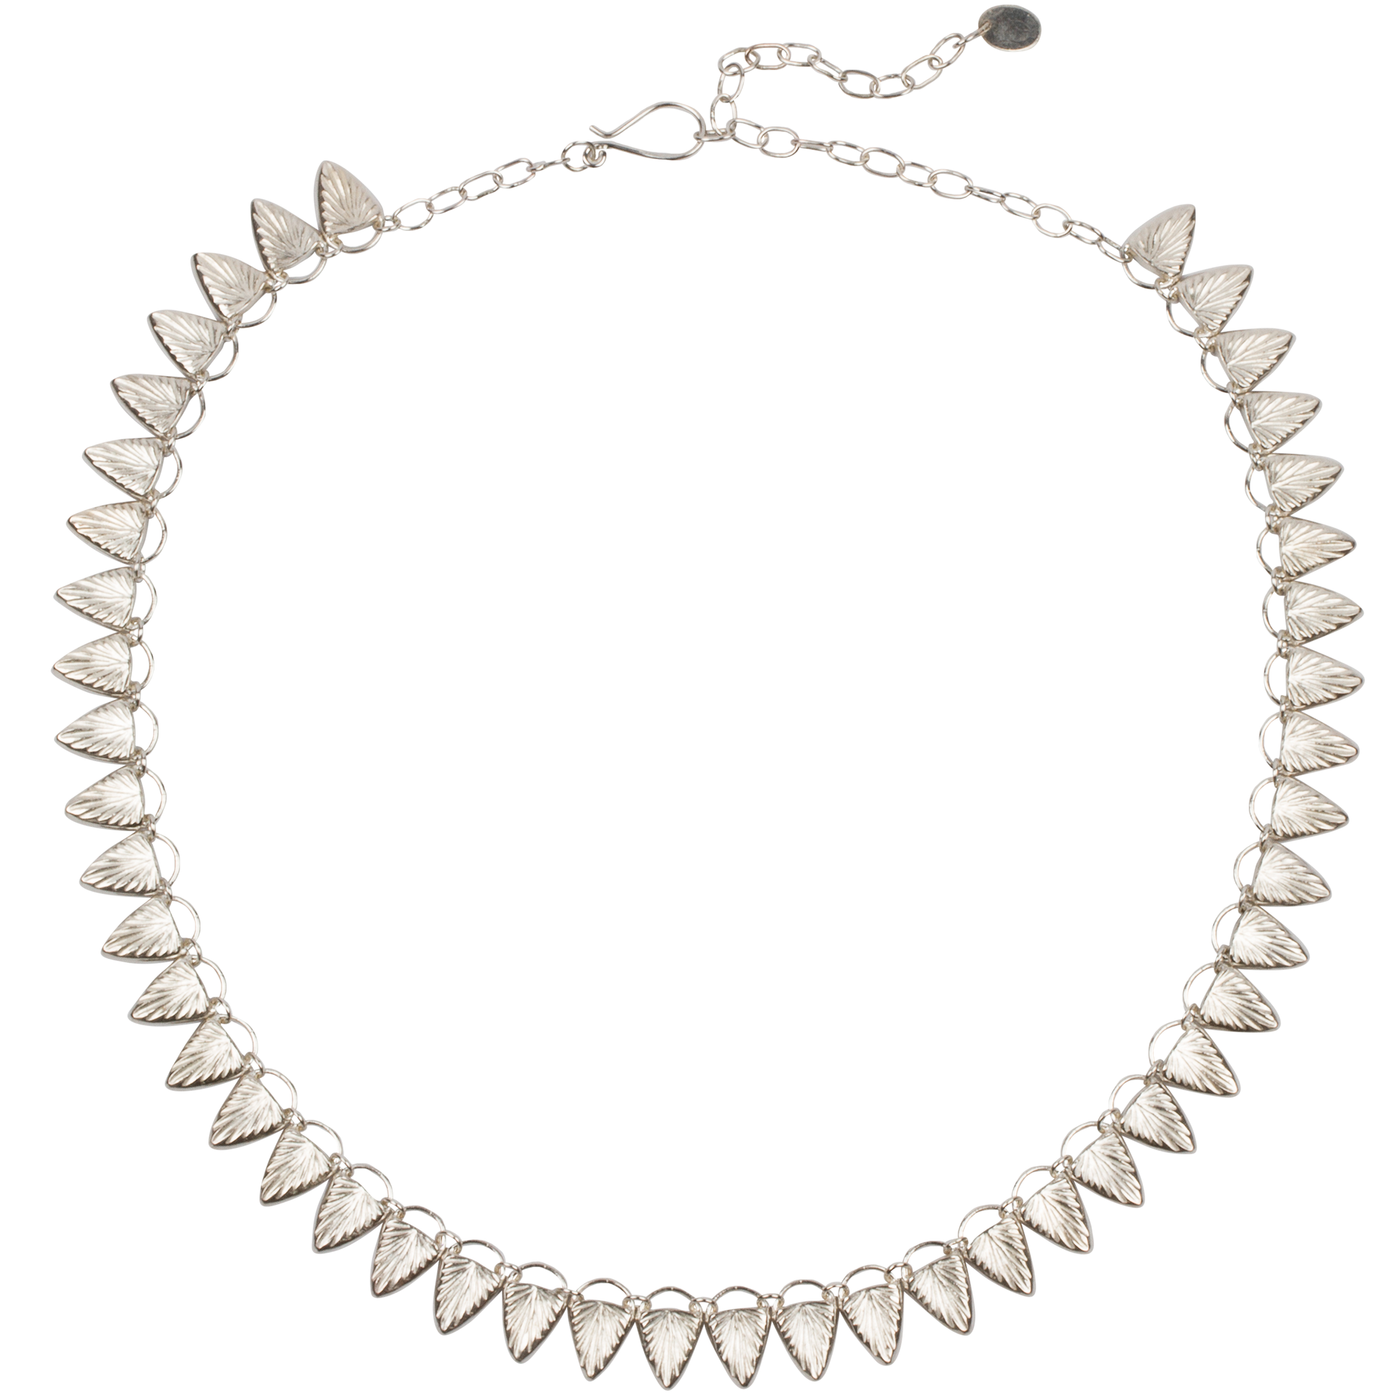 Sterling silver statement necklace made of triangular carved links with a sunburst design on a white background | Corey Egan